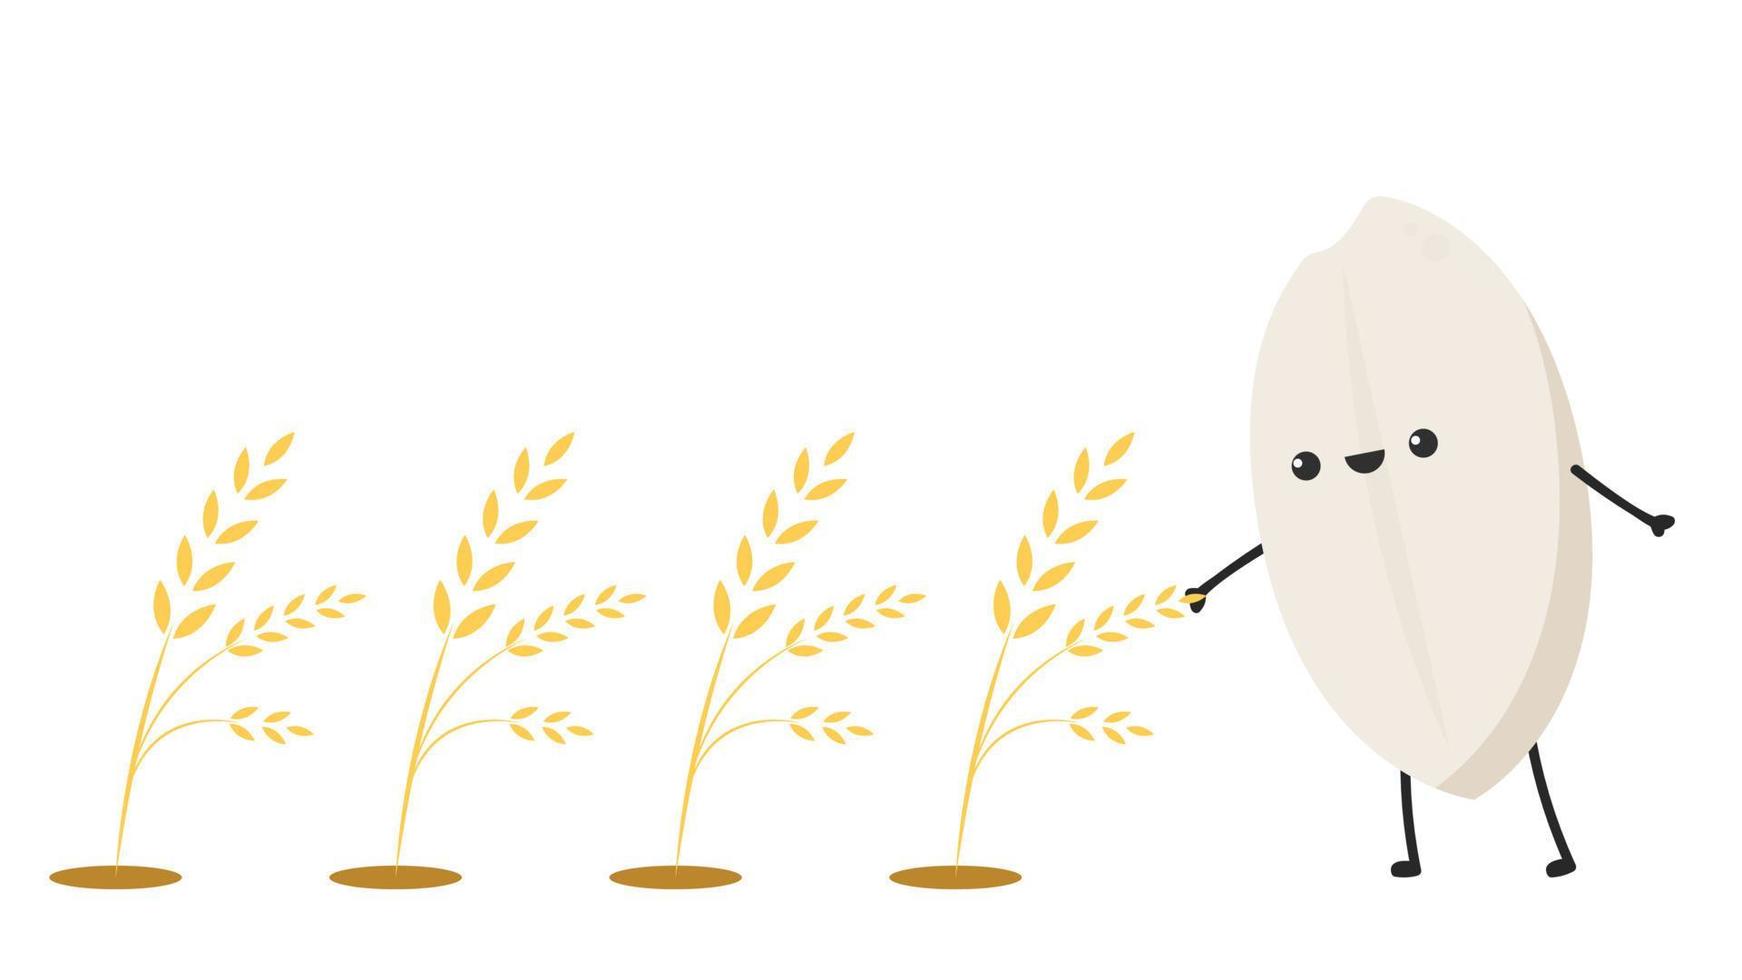 Rice character design. rice vector on white background. rice seed.